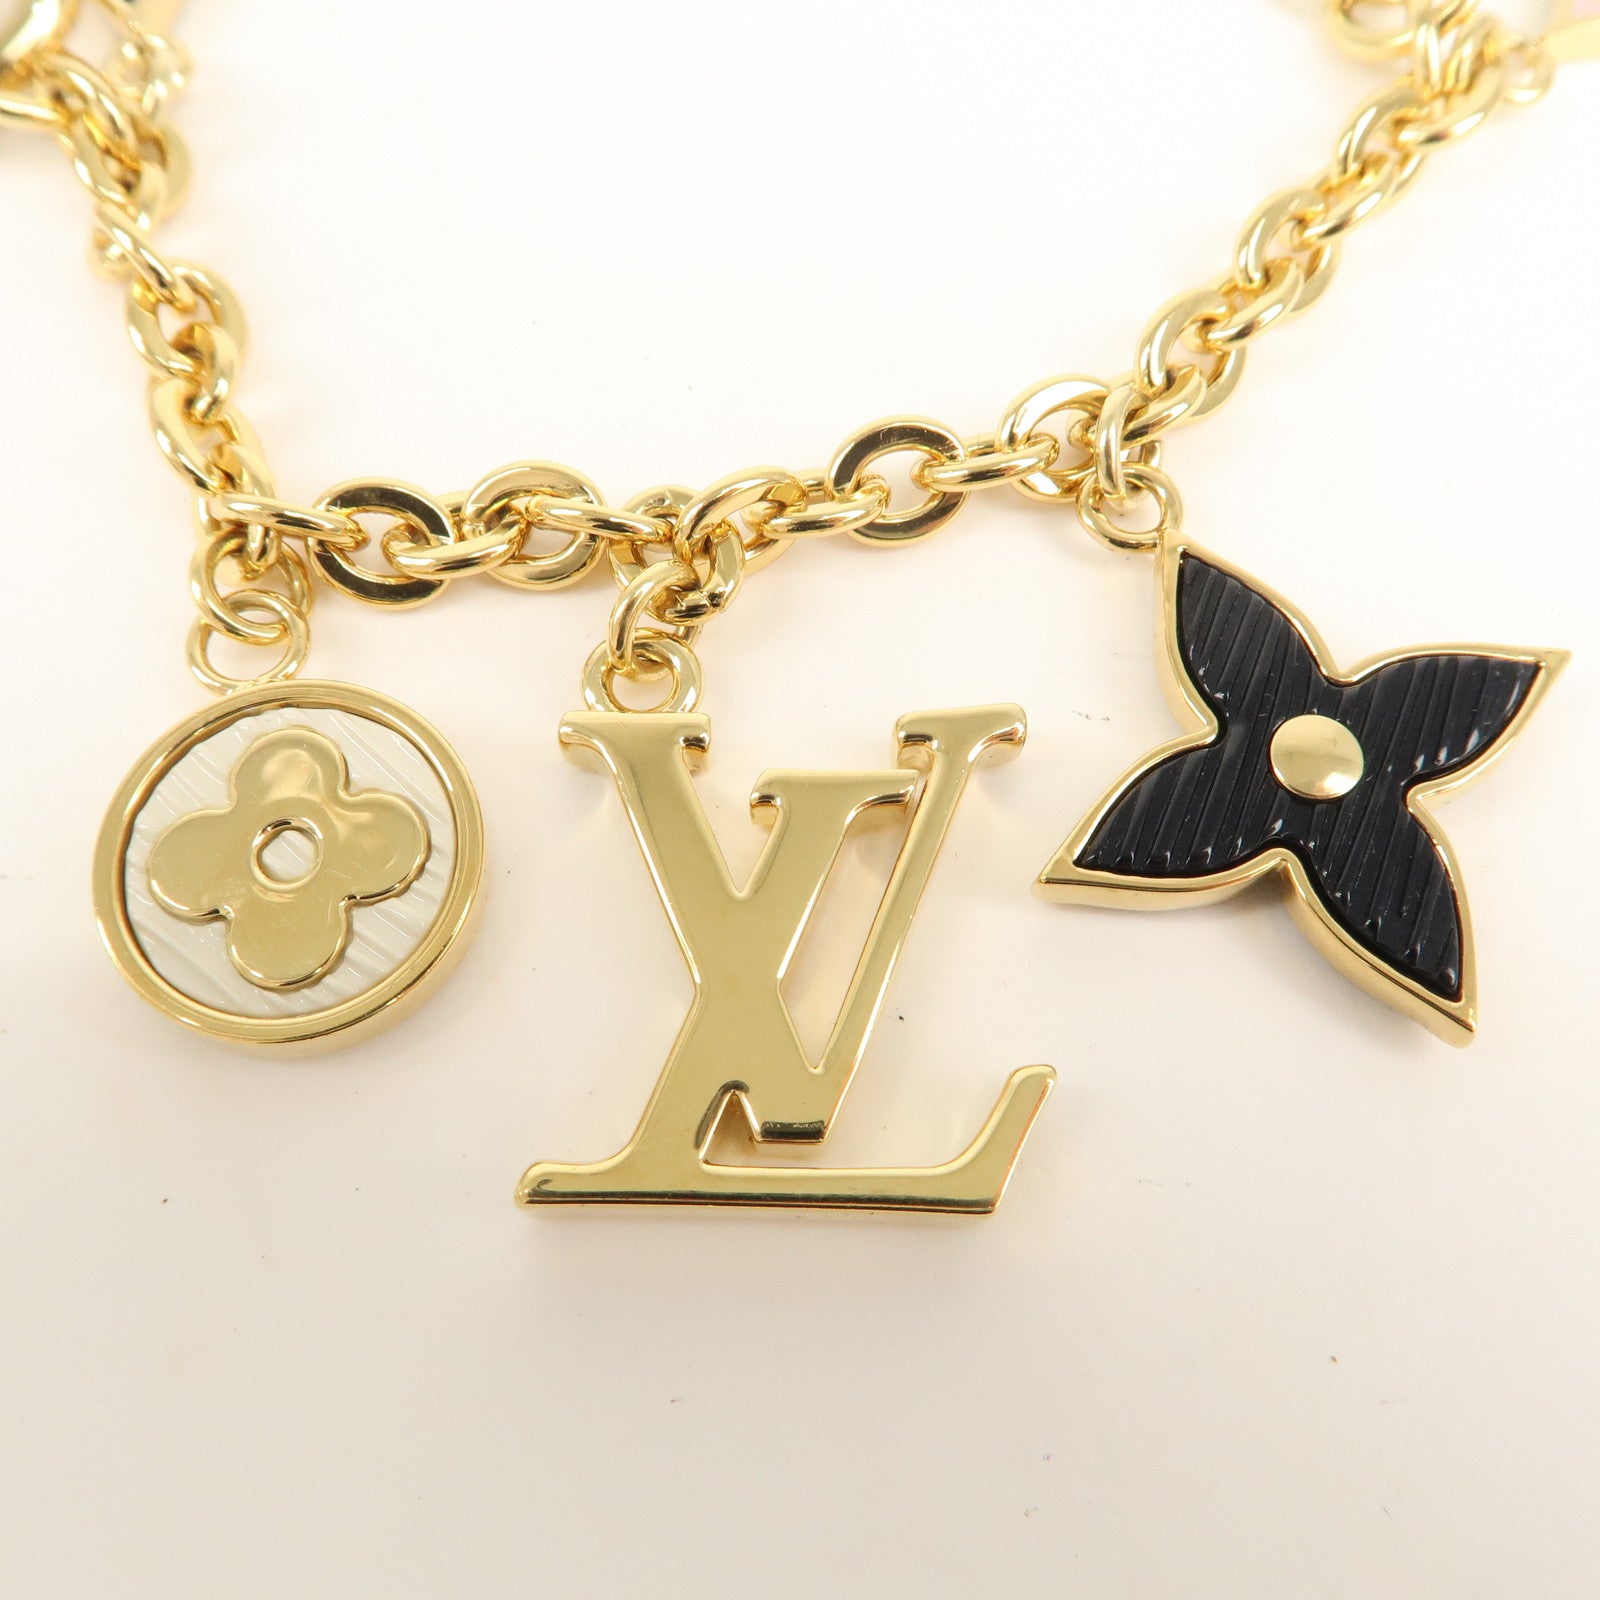 Louis Vuitton Blooming Supple Necklace W/Box Auction